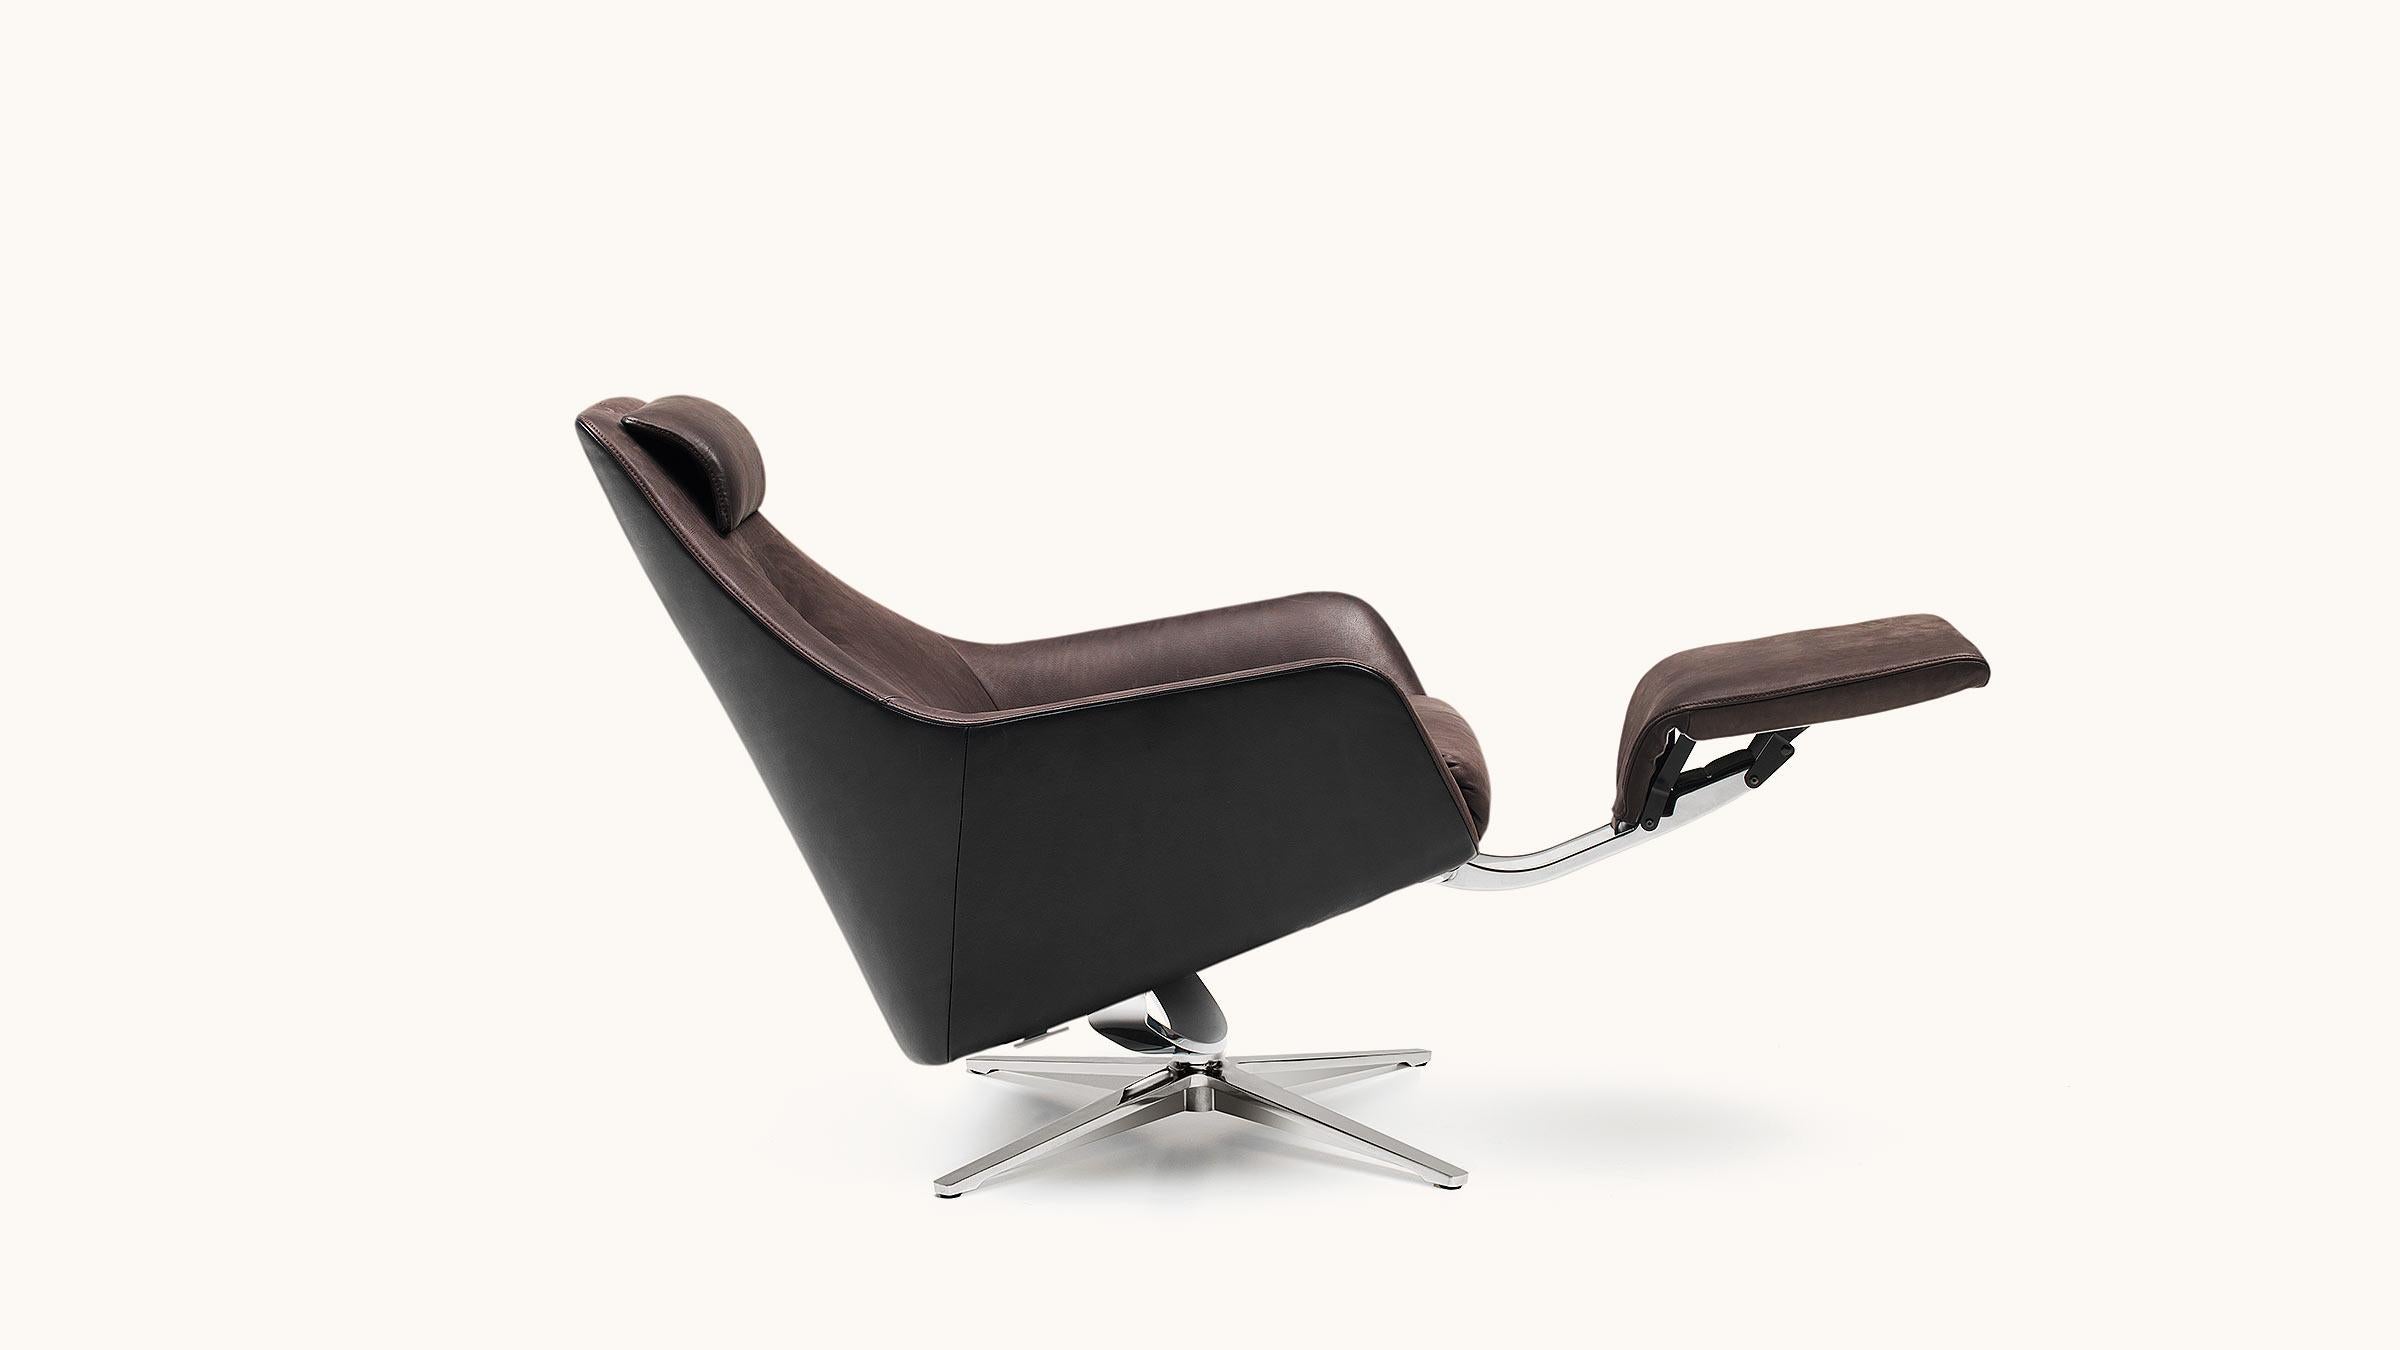 Maximum relax comfort. DS-277 is impressive for its formally exciting transition between the seat and back shell as a characteristic feature. A variety of leather qualities are available for the outer and inner shell. Infinitely height-adjustable